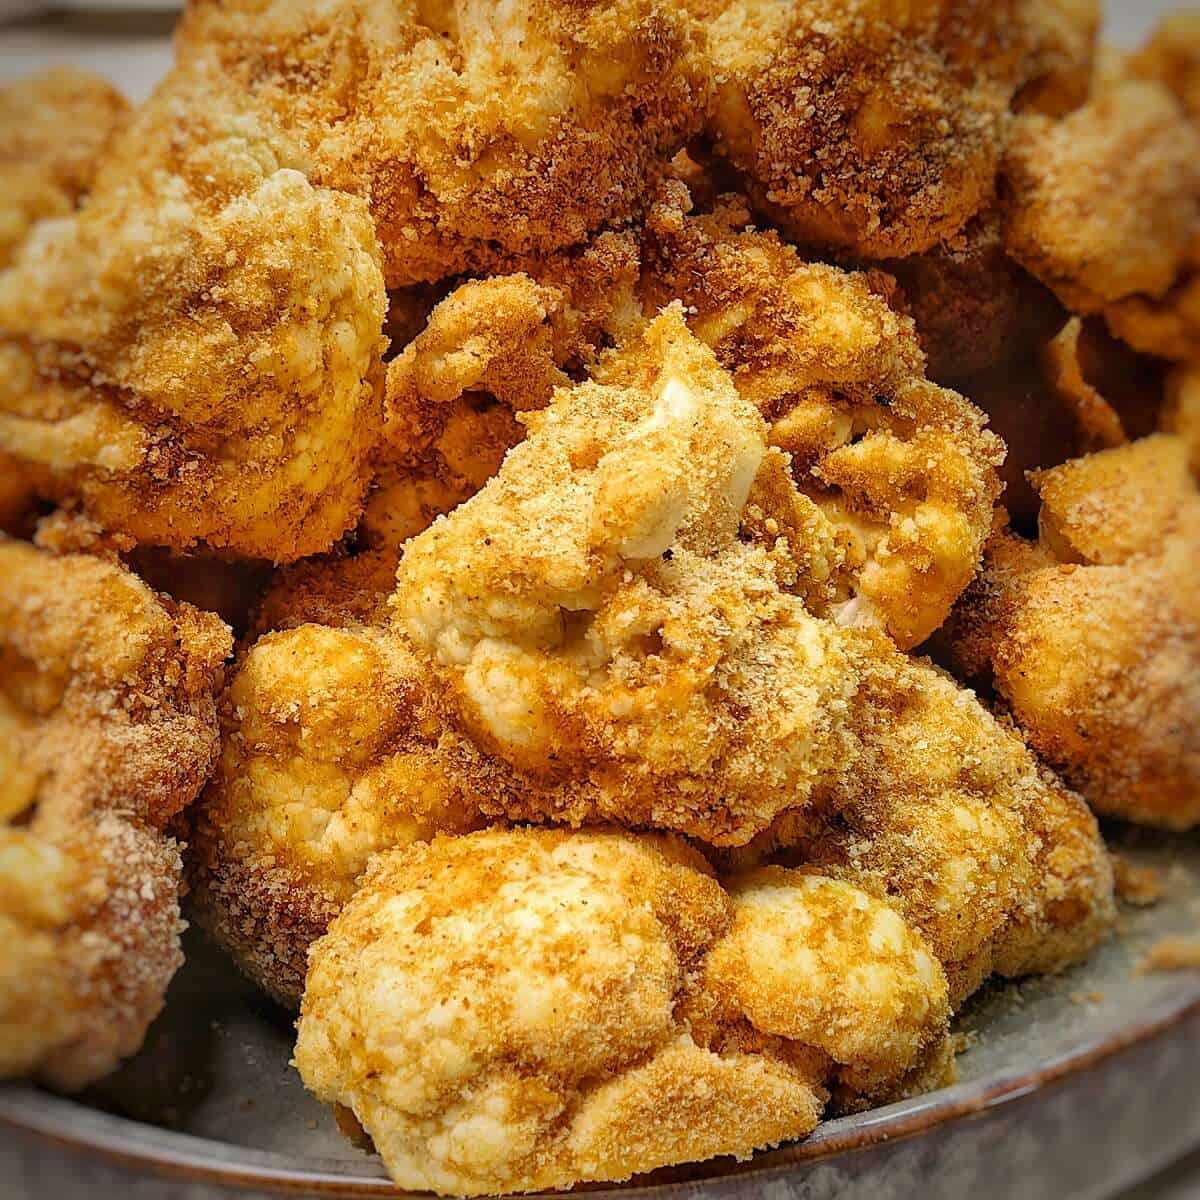 dip each cauliflower floret into egg mixture and coat with breadcrumbs